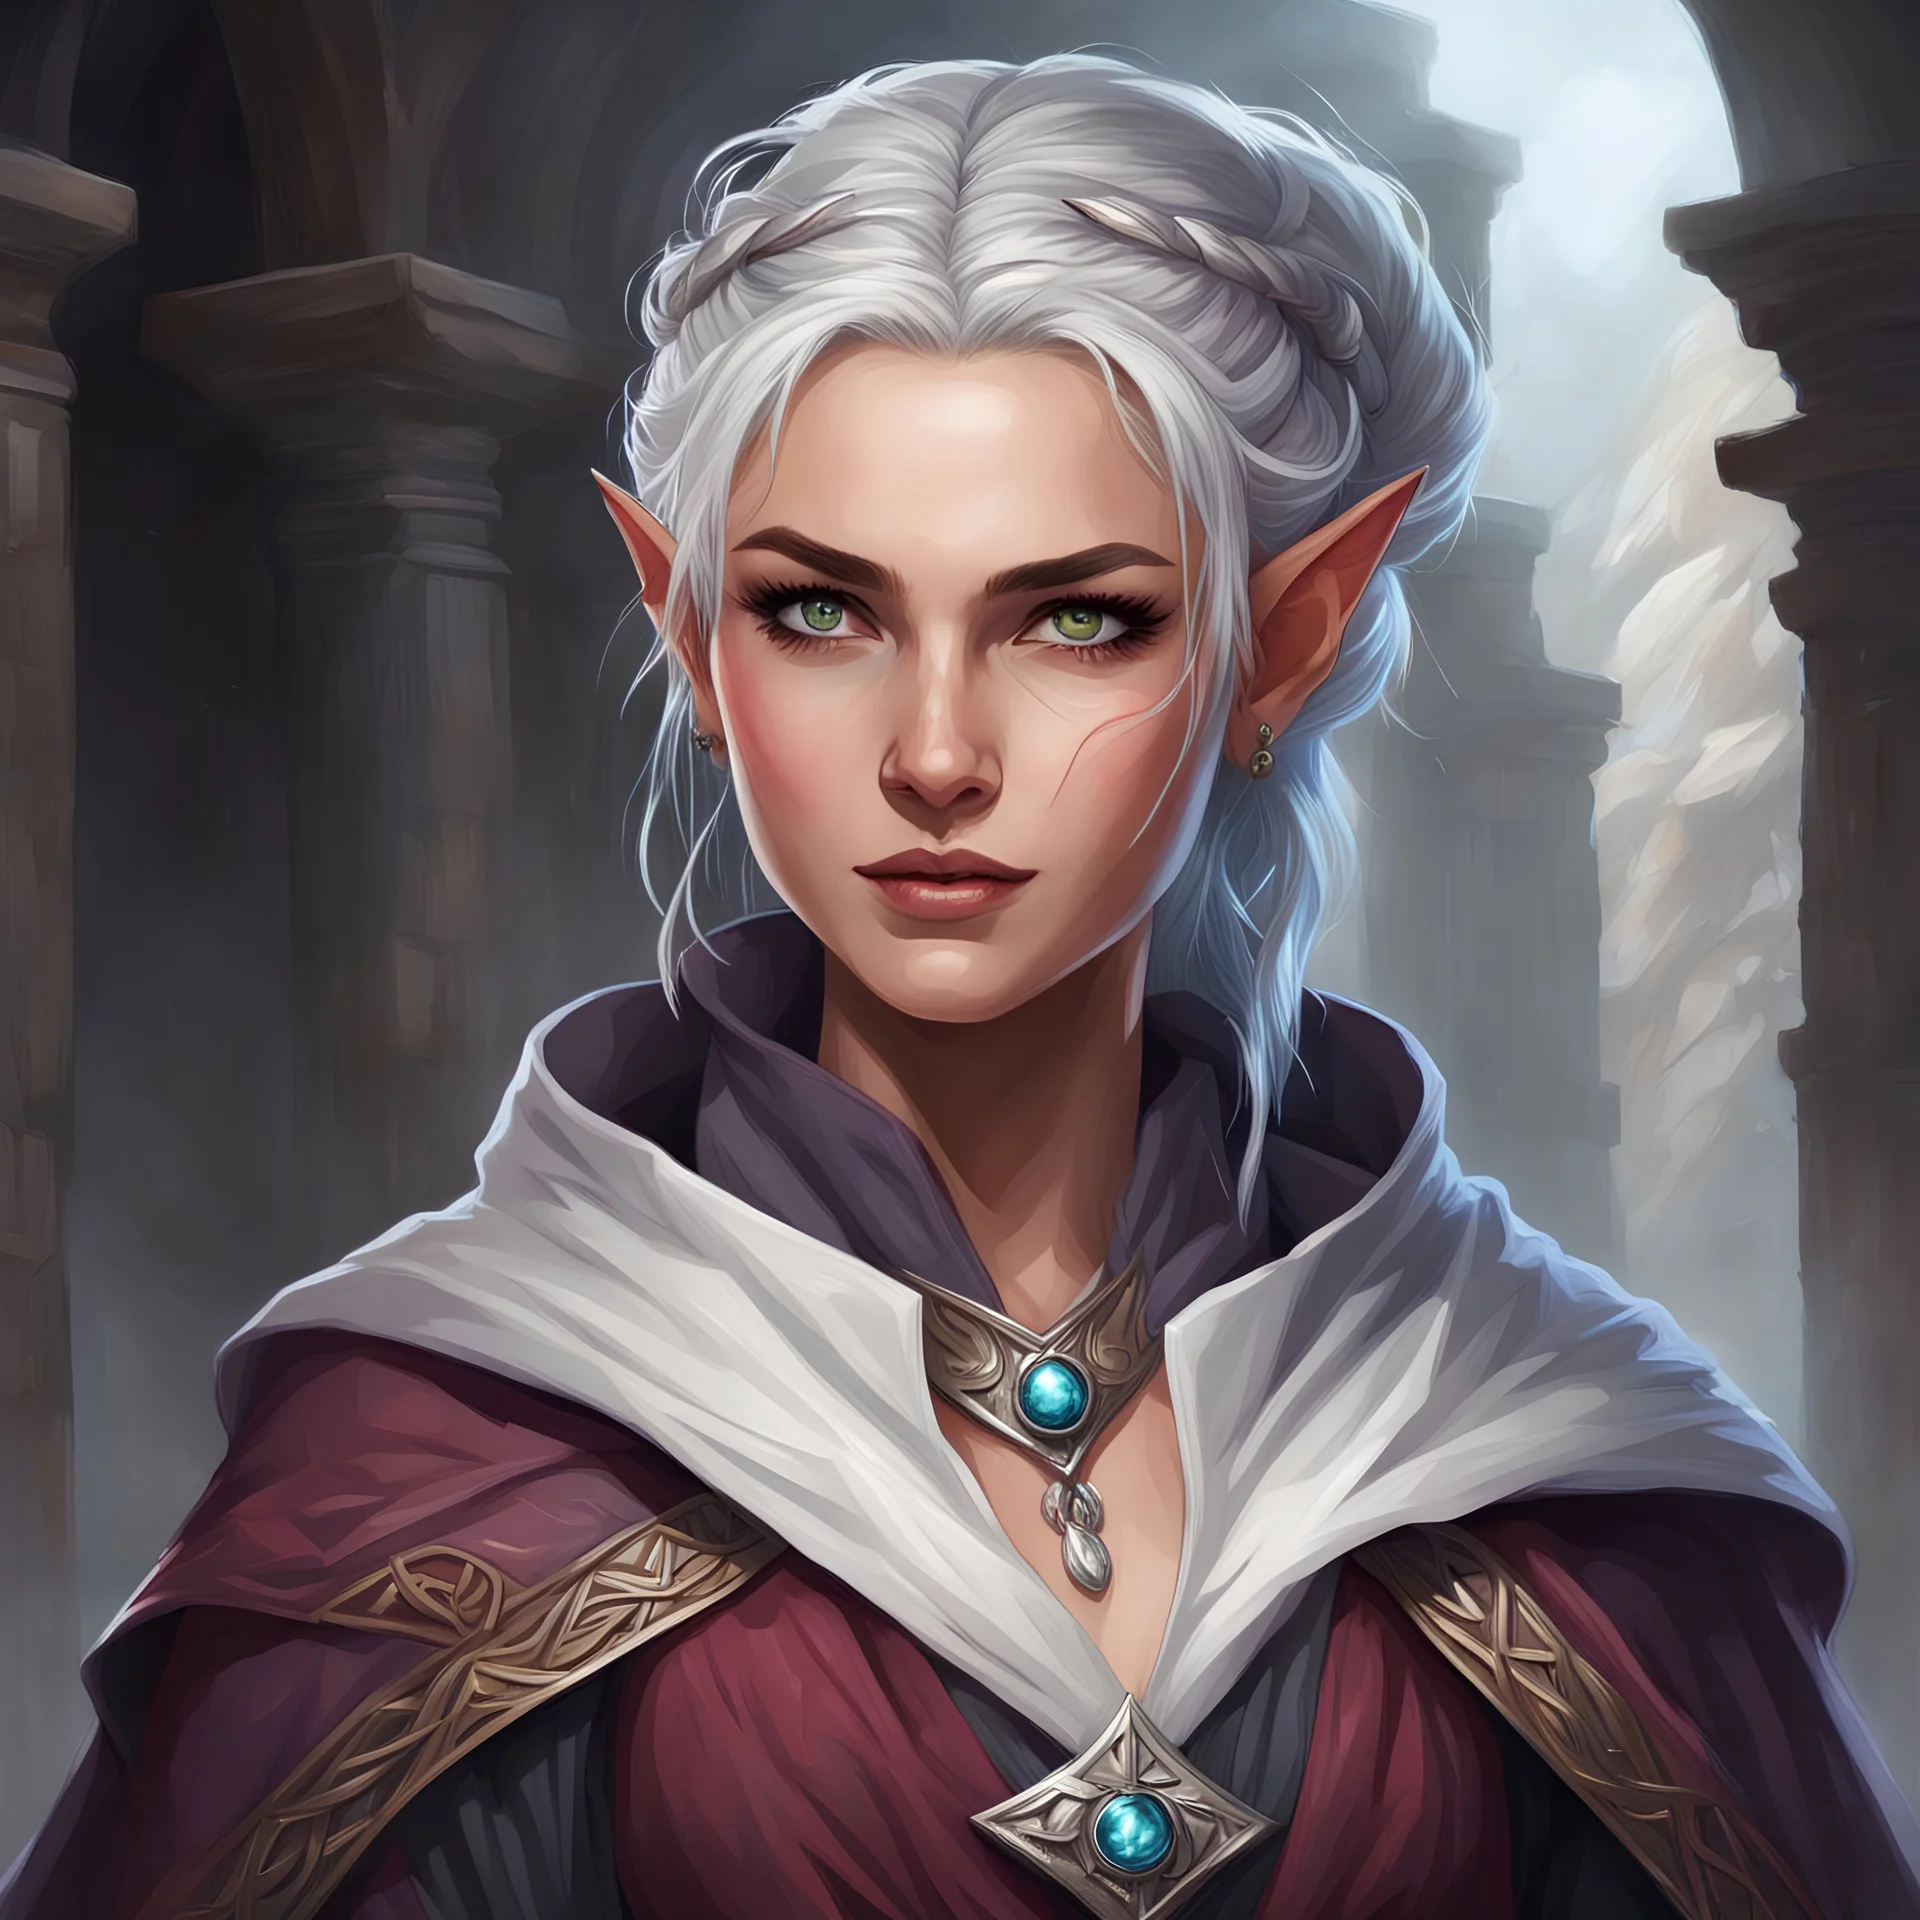 dungeons & dragons; digital art; portrait; female; sorceress; dragonic bloodline; two colored eyes; silver hair; young woman; flowing robes; veil; braided bun; greek dress; soft smile; cloak; magic; half-elf; no makeup; dark clothes; mage clothes; traveling; young